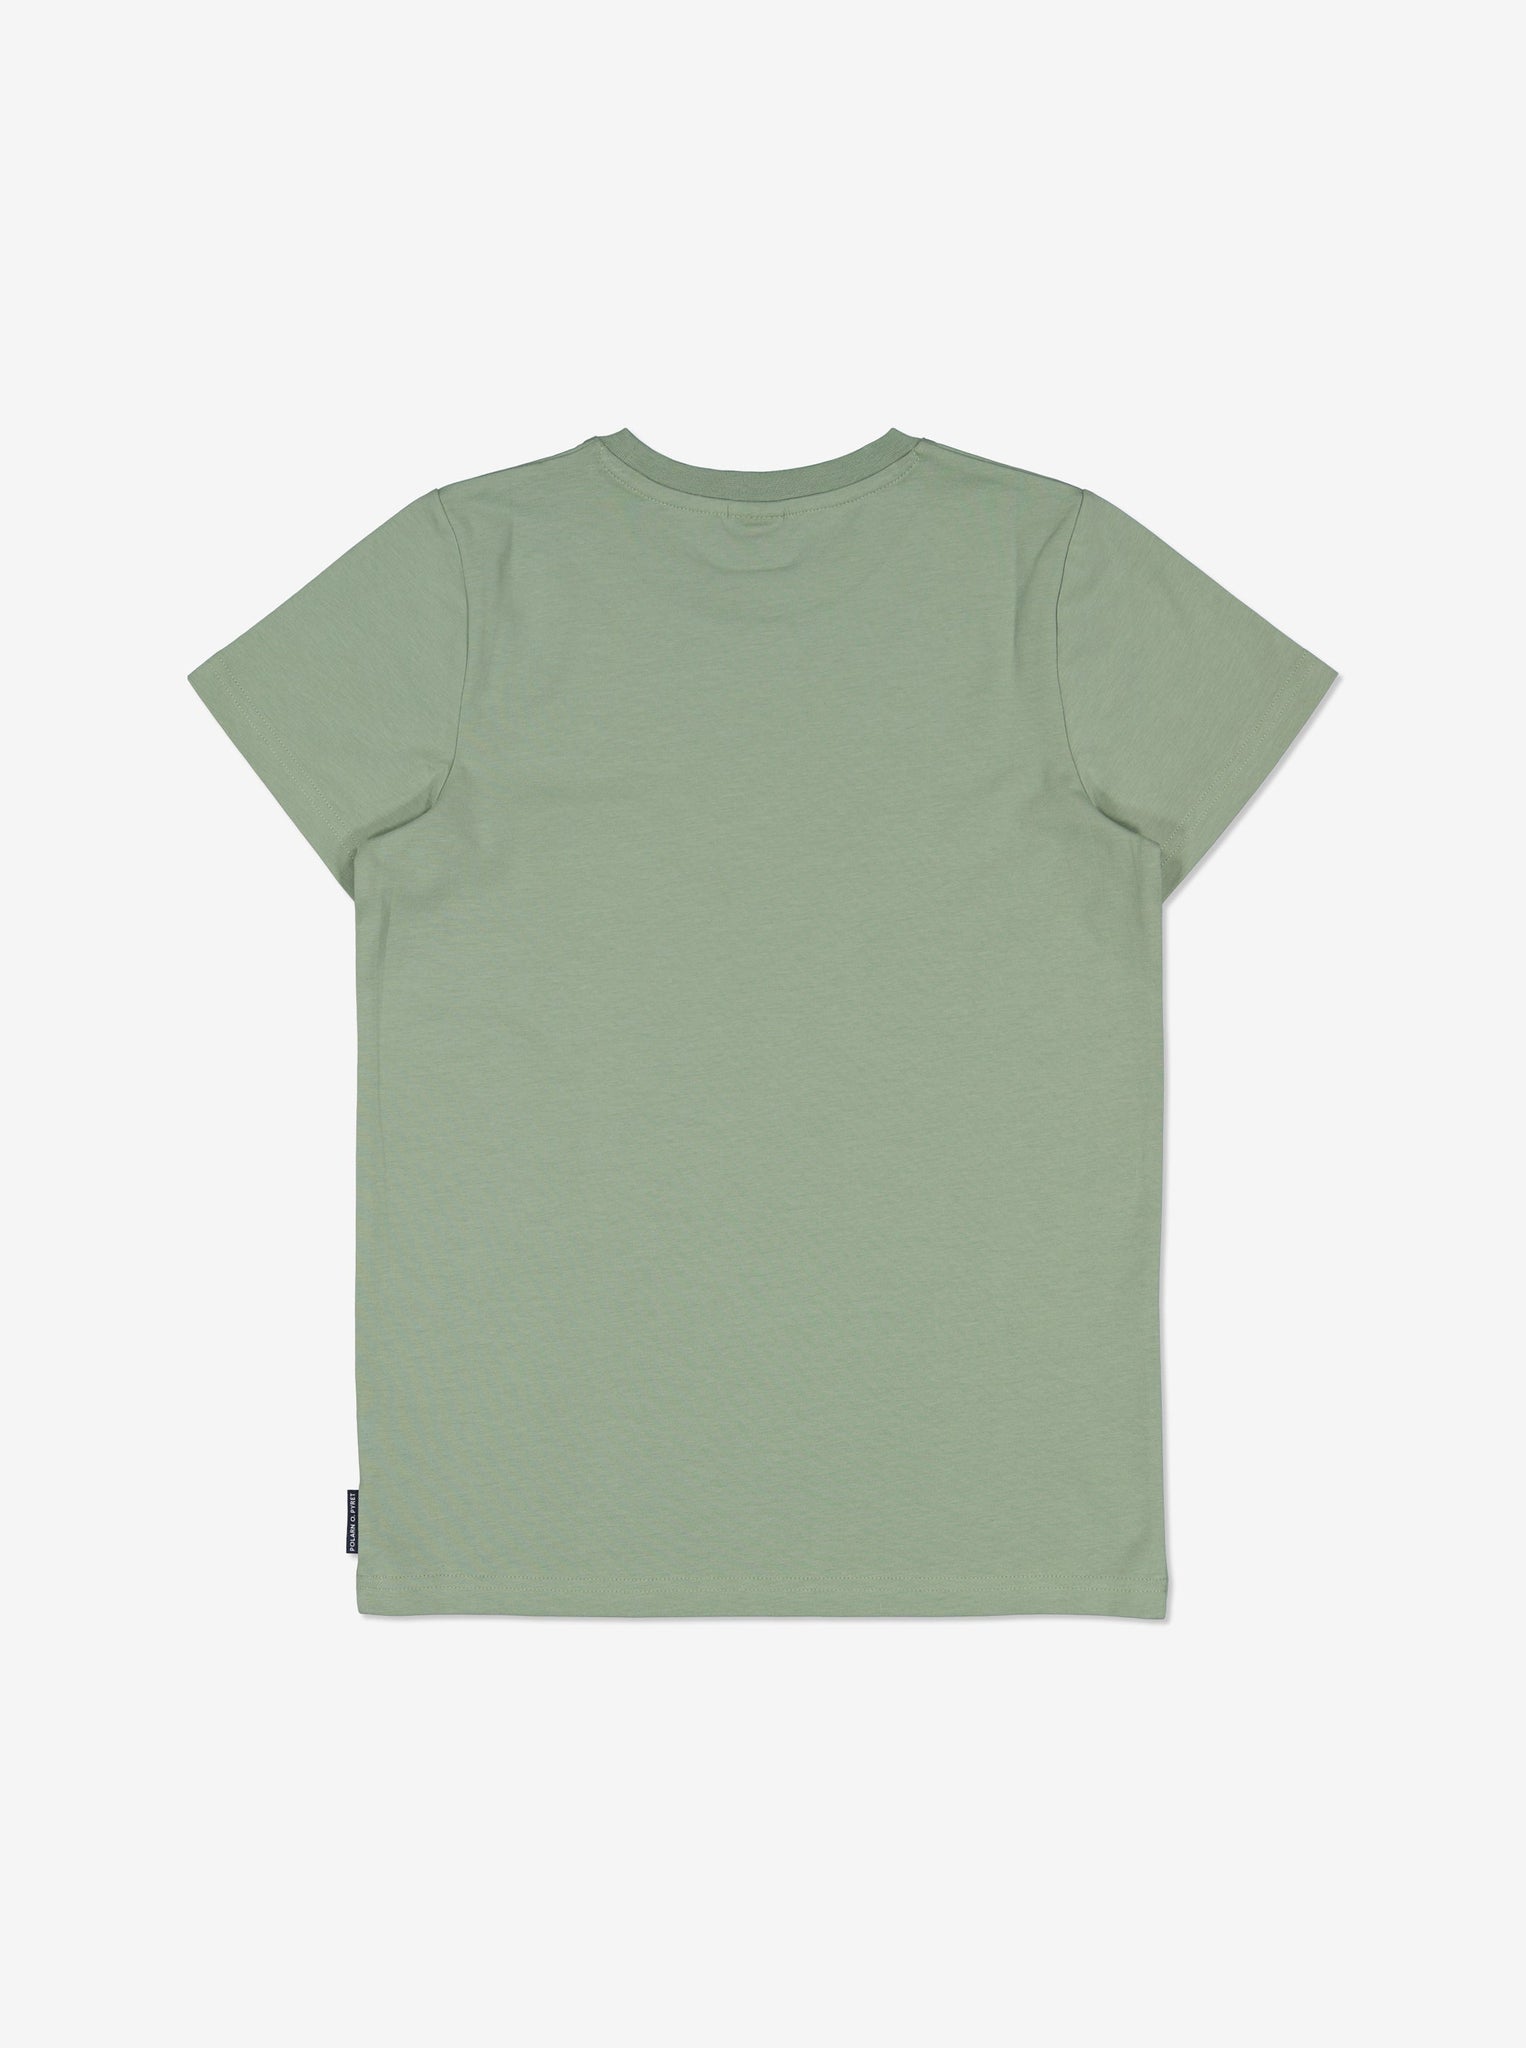 Green Shark Kids T-Shirt from Polarn O. Pyret Kidswear. Made using sustainable sourced materials.